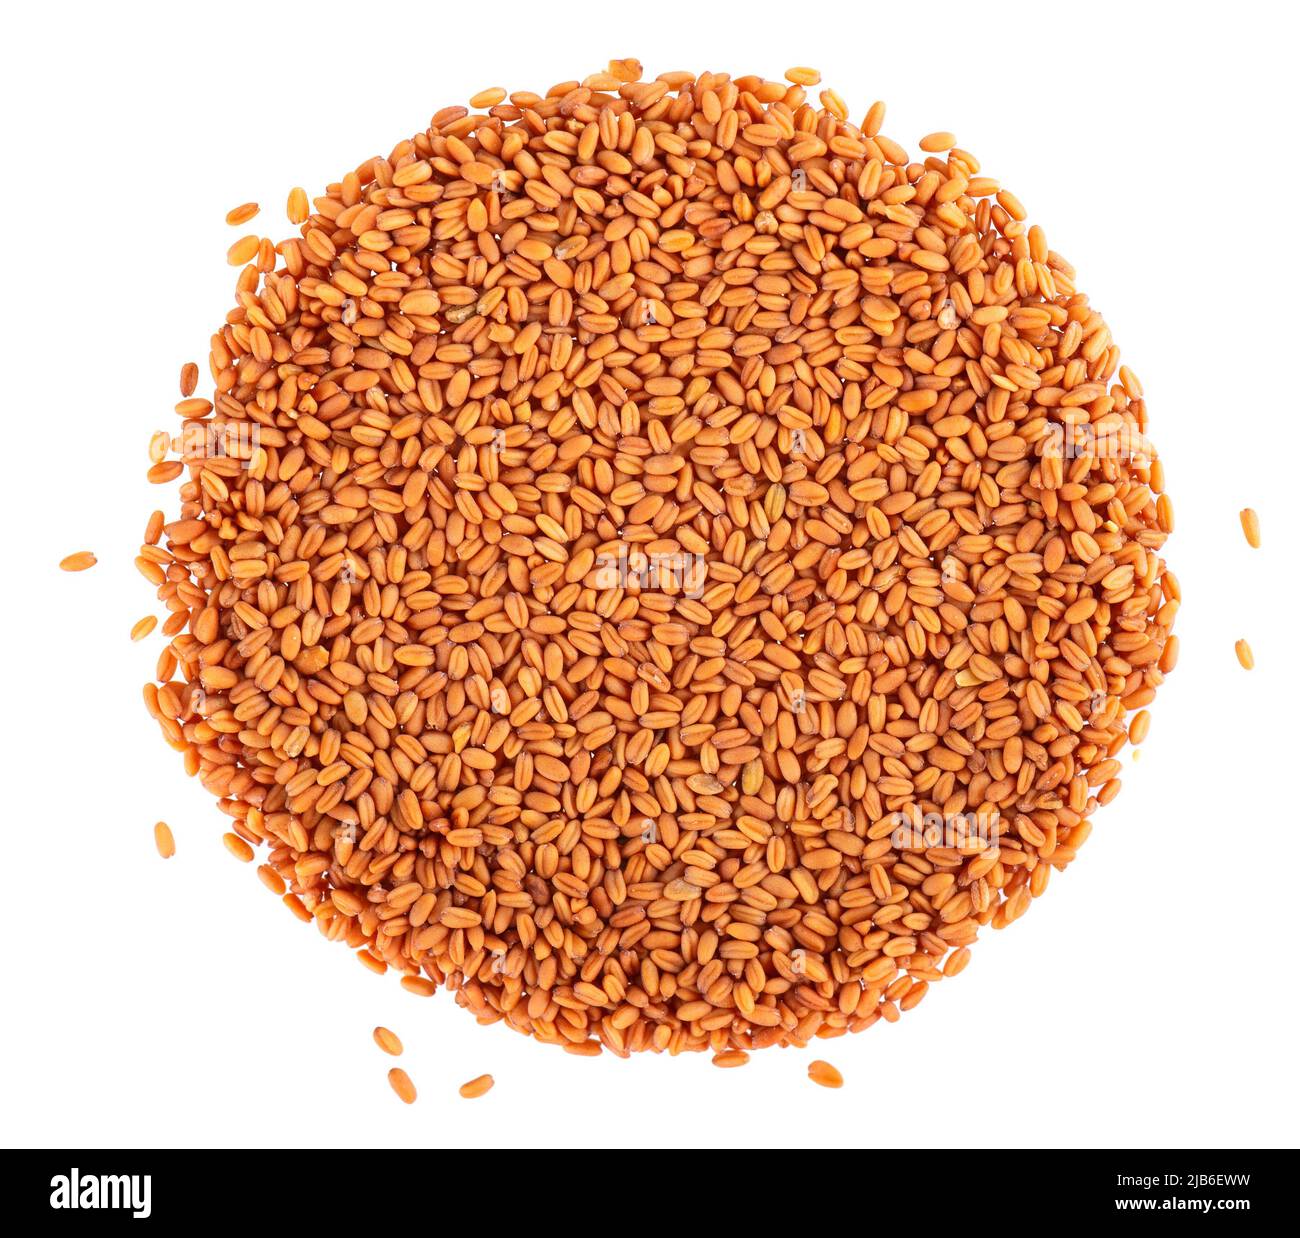 Camelina sativa seeds isolated on white background. Seeds of camelina or false flax. Raw material for the production of camelina oil. Top view Stock Photo